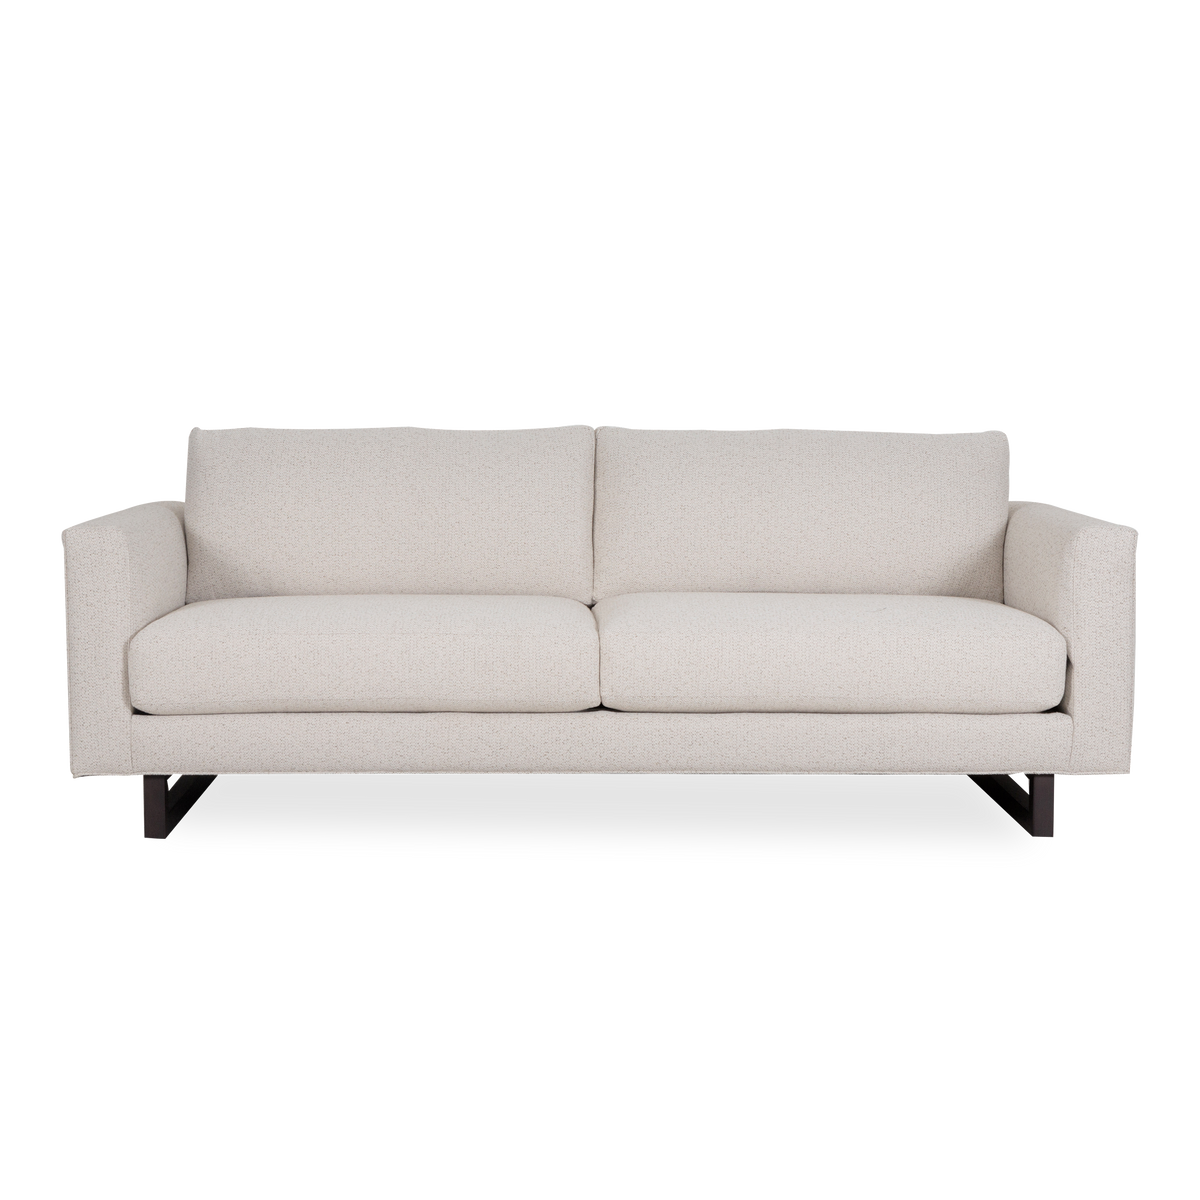 With an industrial edge in its design, the Direct Sofa balances ultimate comfort with modern styling.